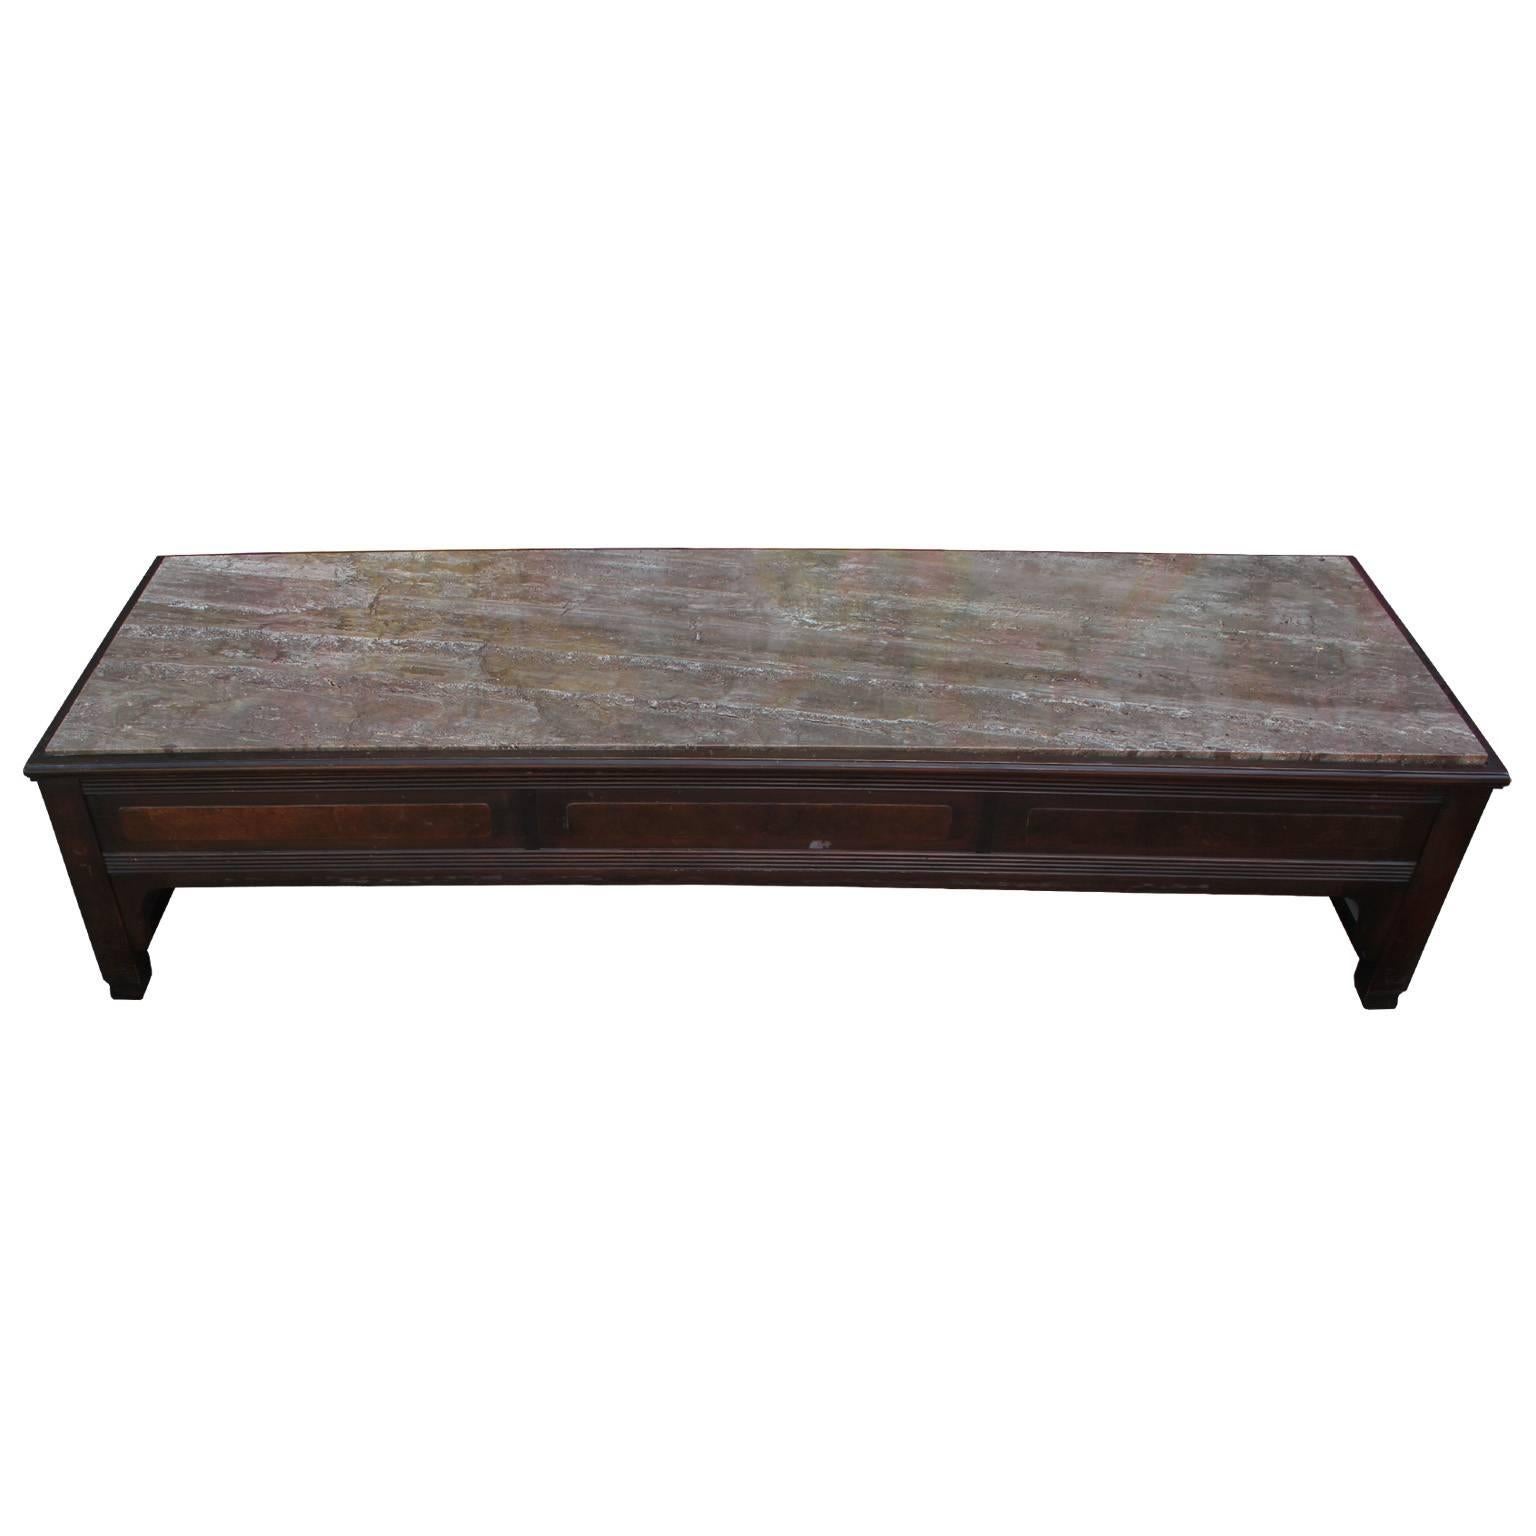 Campaign Modern Widdicomb Brass and Marble Topped Coffee Table with Walnut Base